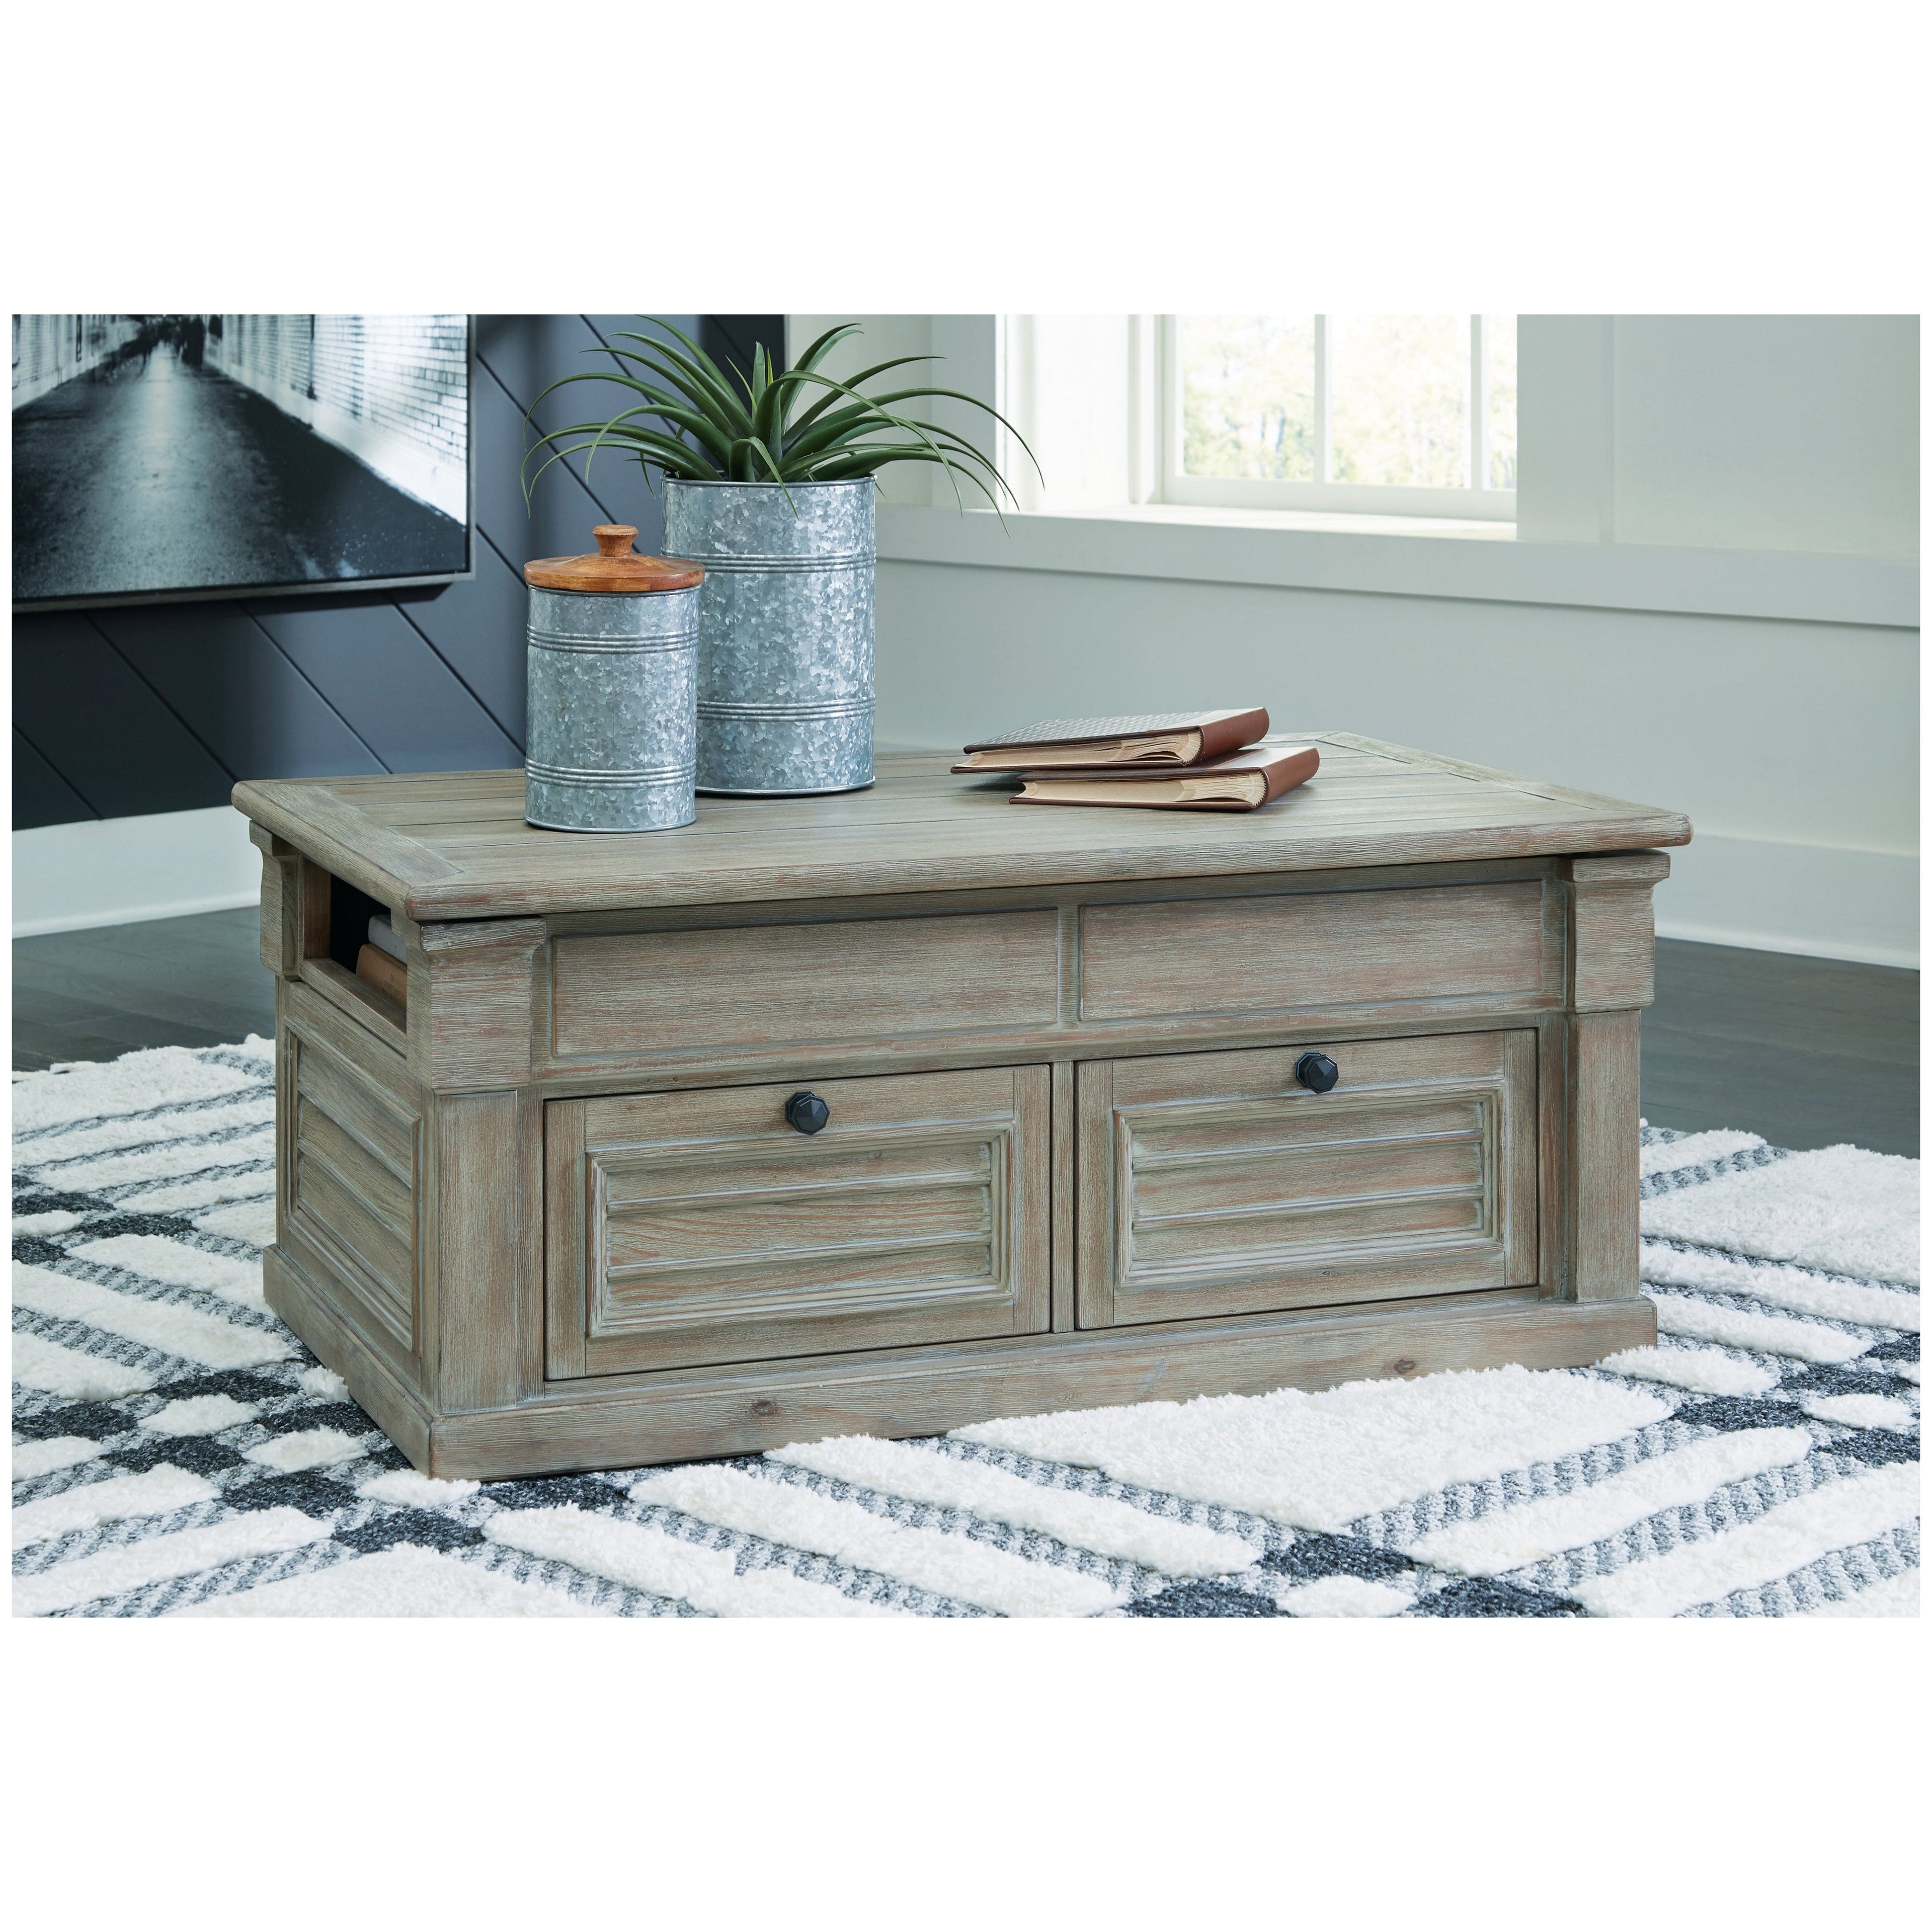 Moreshire Lift Top Coffee Table Ash-T659-20